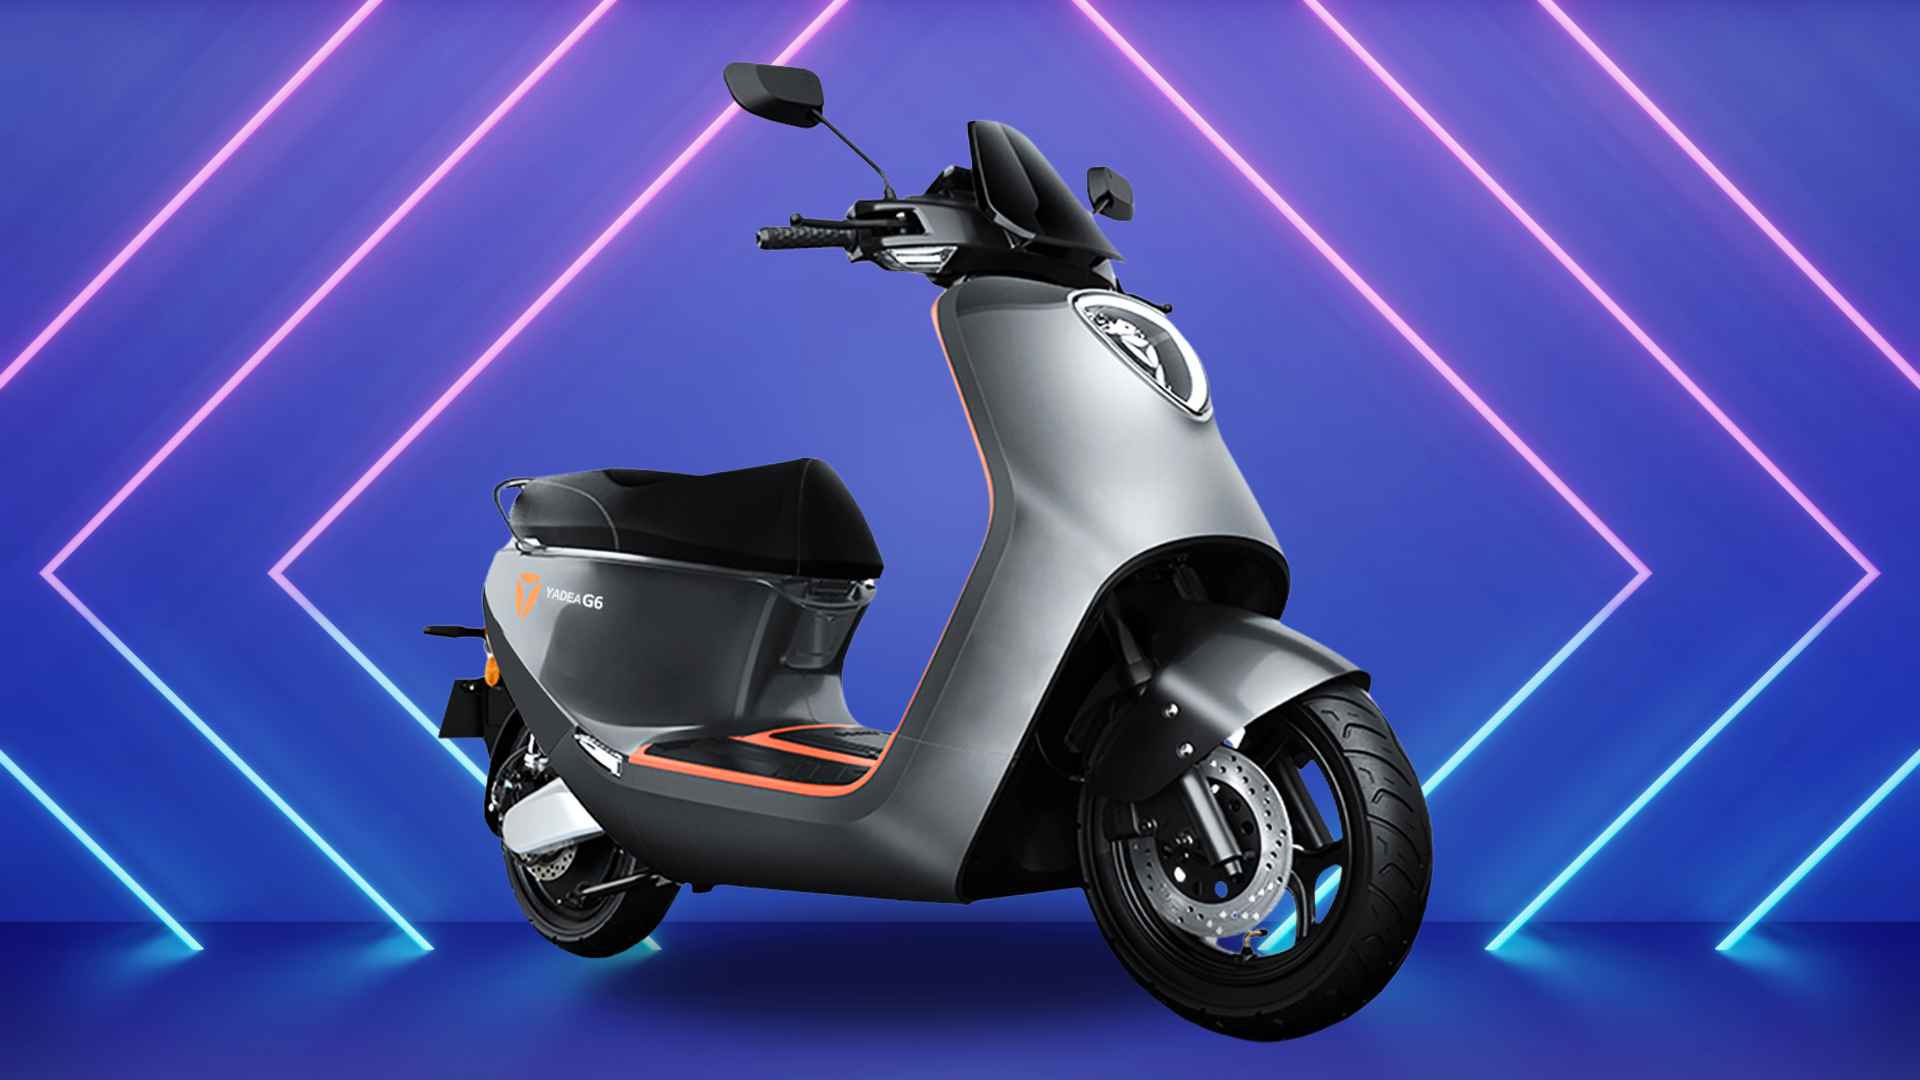 Yadea G6 Electric Scooter Officially Launched in Nepal!